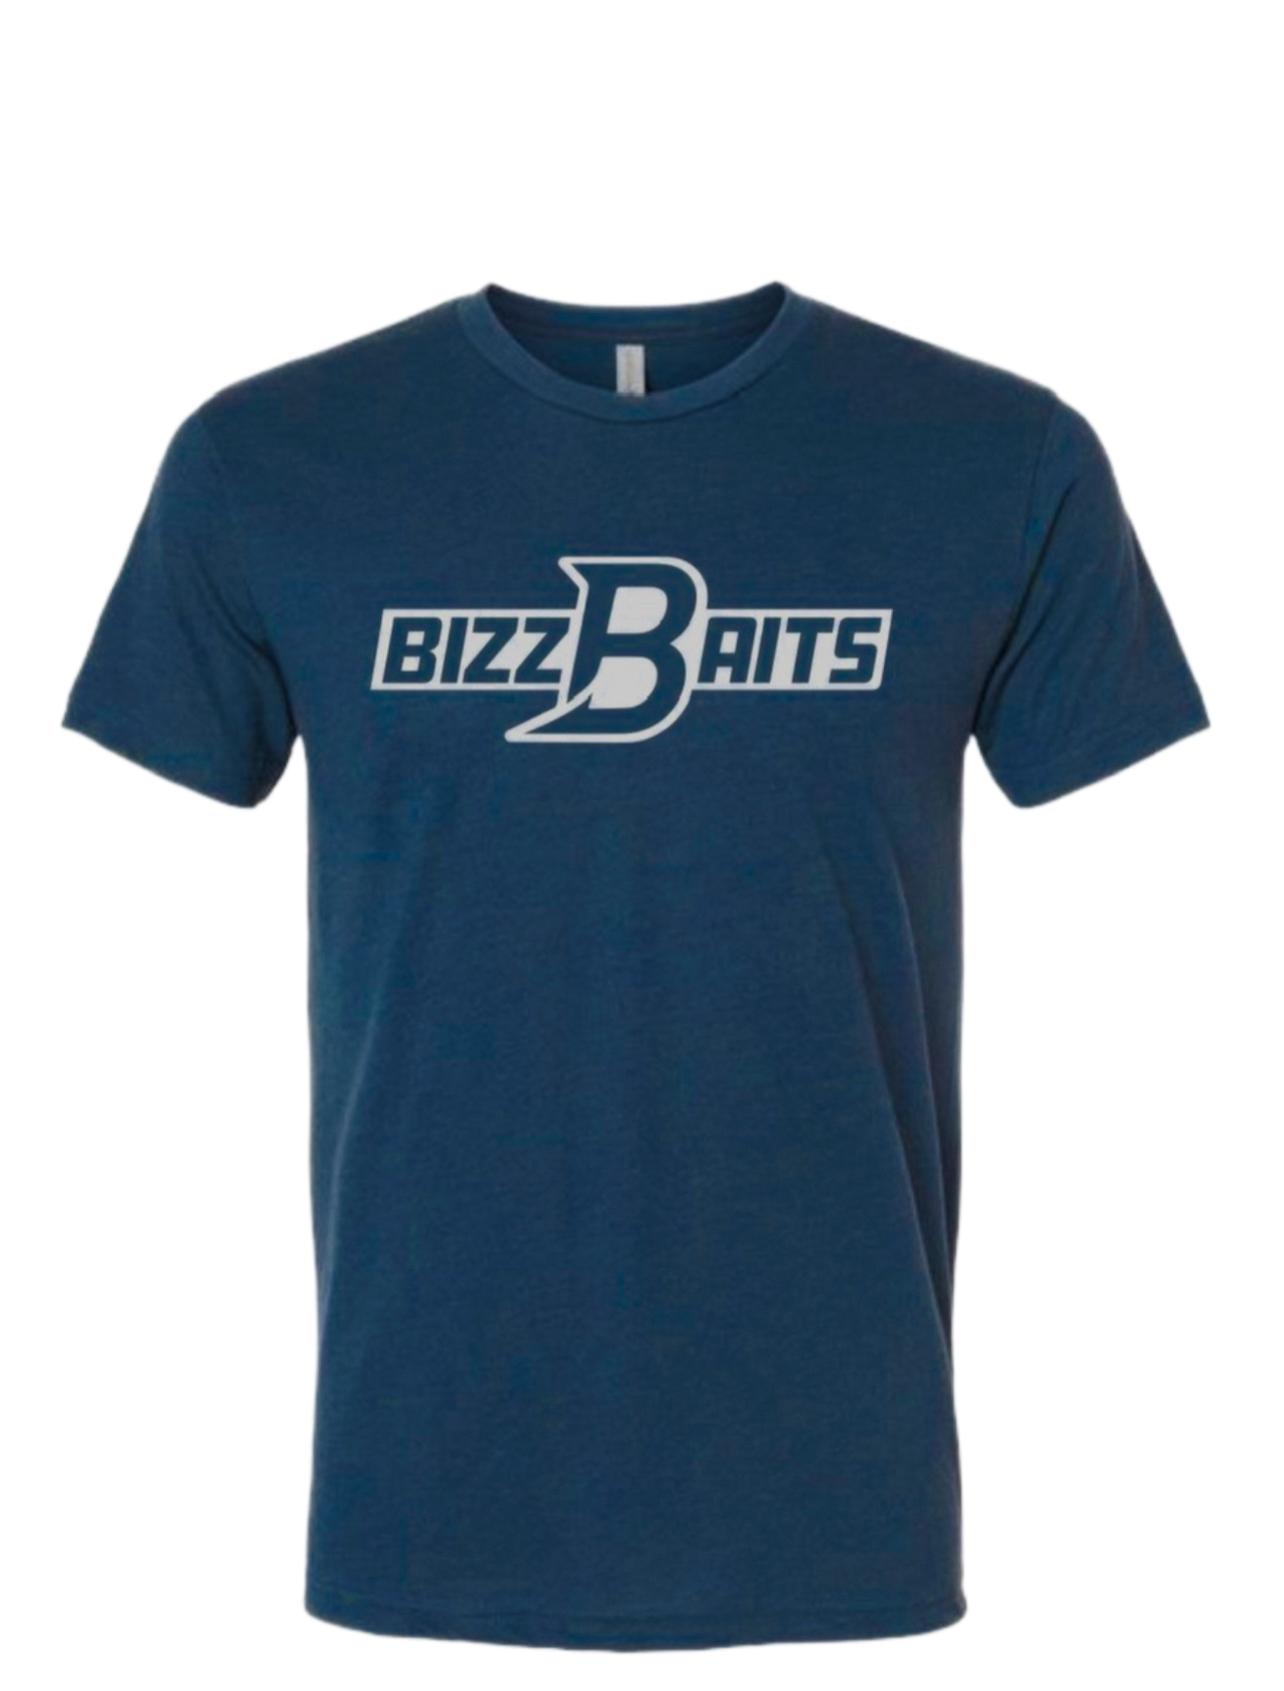 Bizz T-Shirt (+$1 and$2 for 2X and 3X)